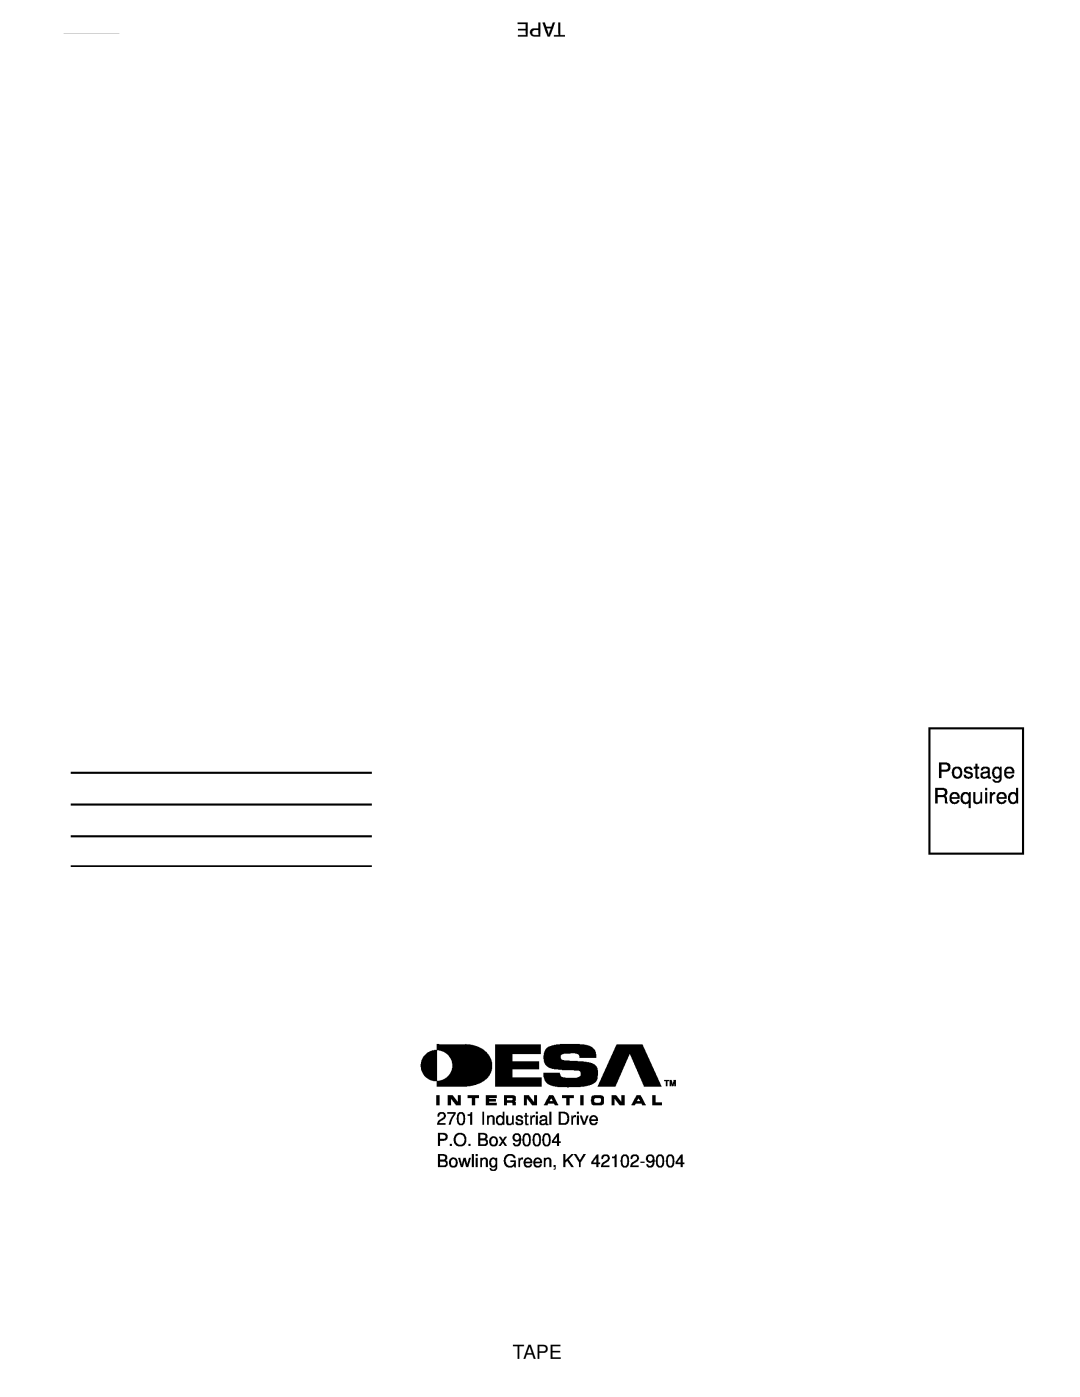 Desa VFB50NC, V50SH installation manual Postage Required, Tape, Industrial Drive P.O. Box Bowling Green, KY 